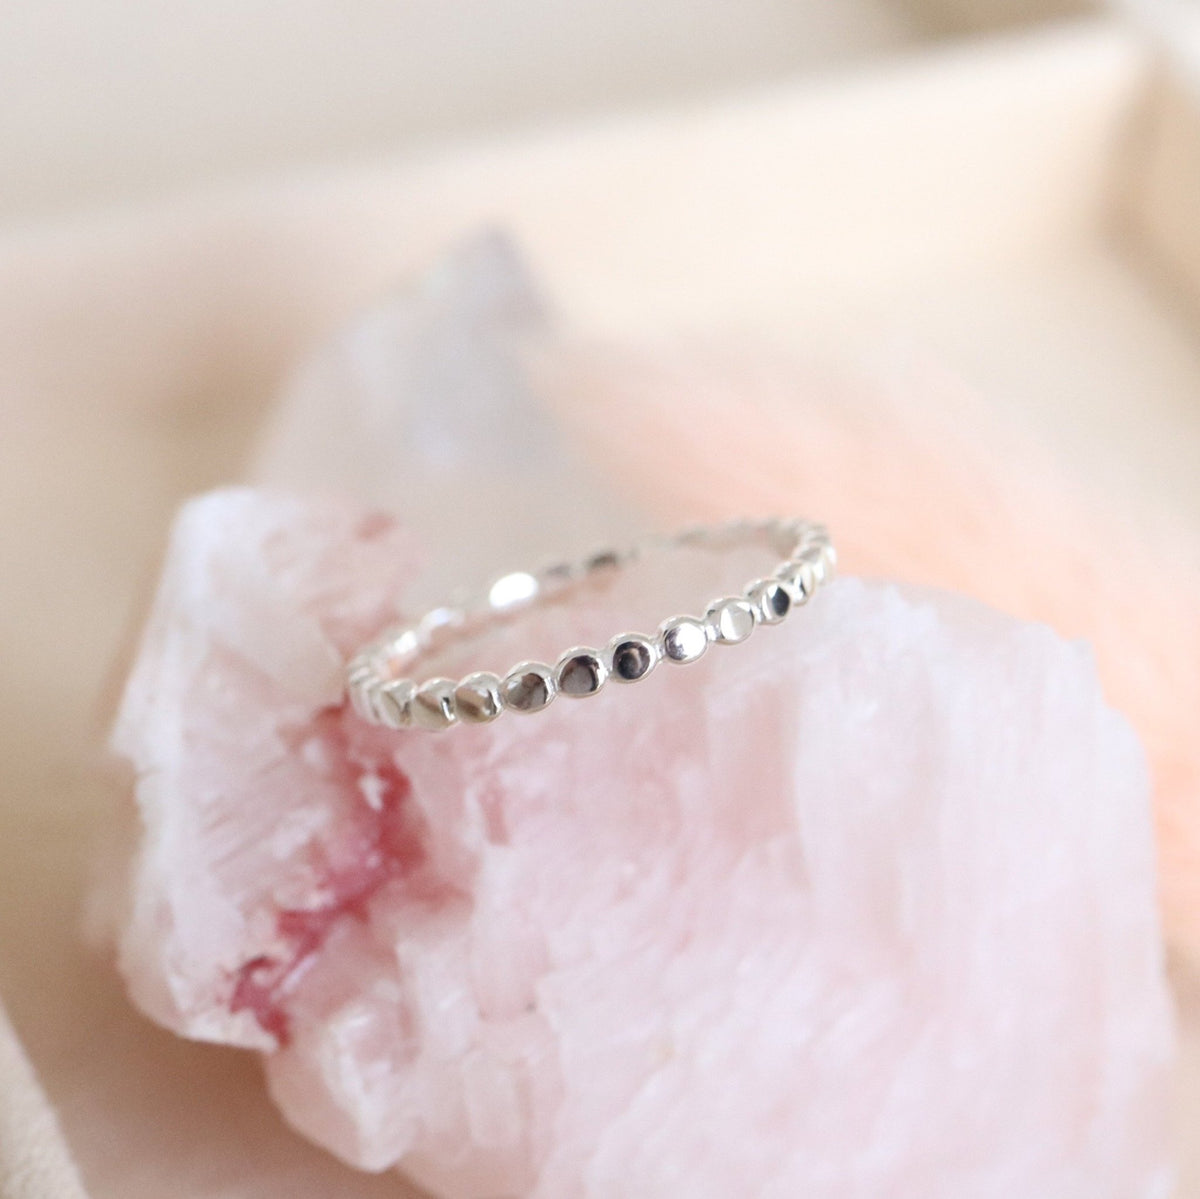 POISE THIN DISK BAND RING - SILVER - SO PRETTY CARA COTTER